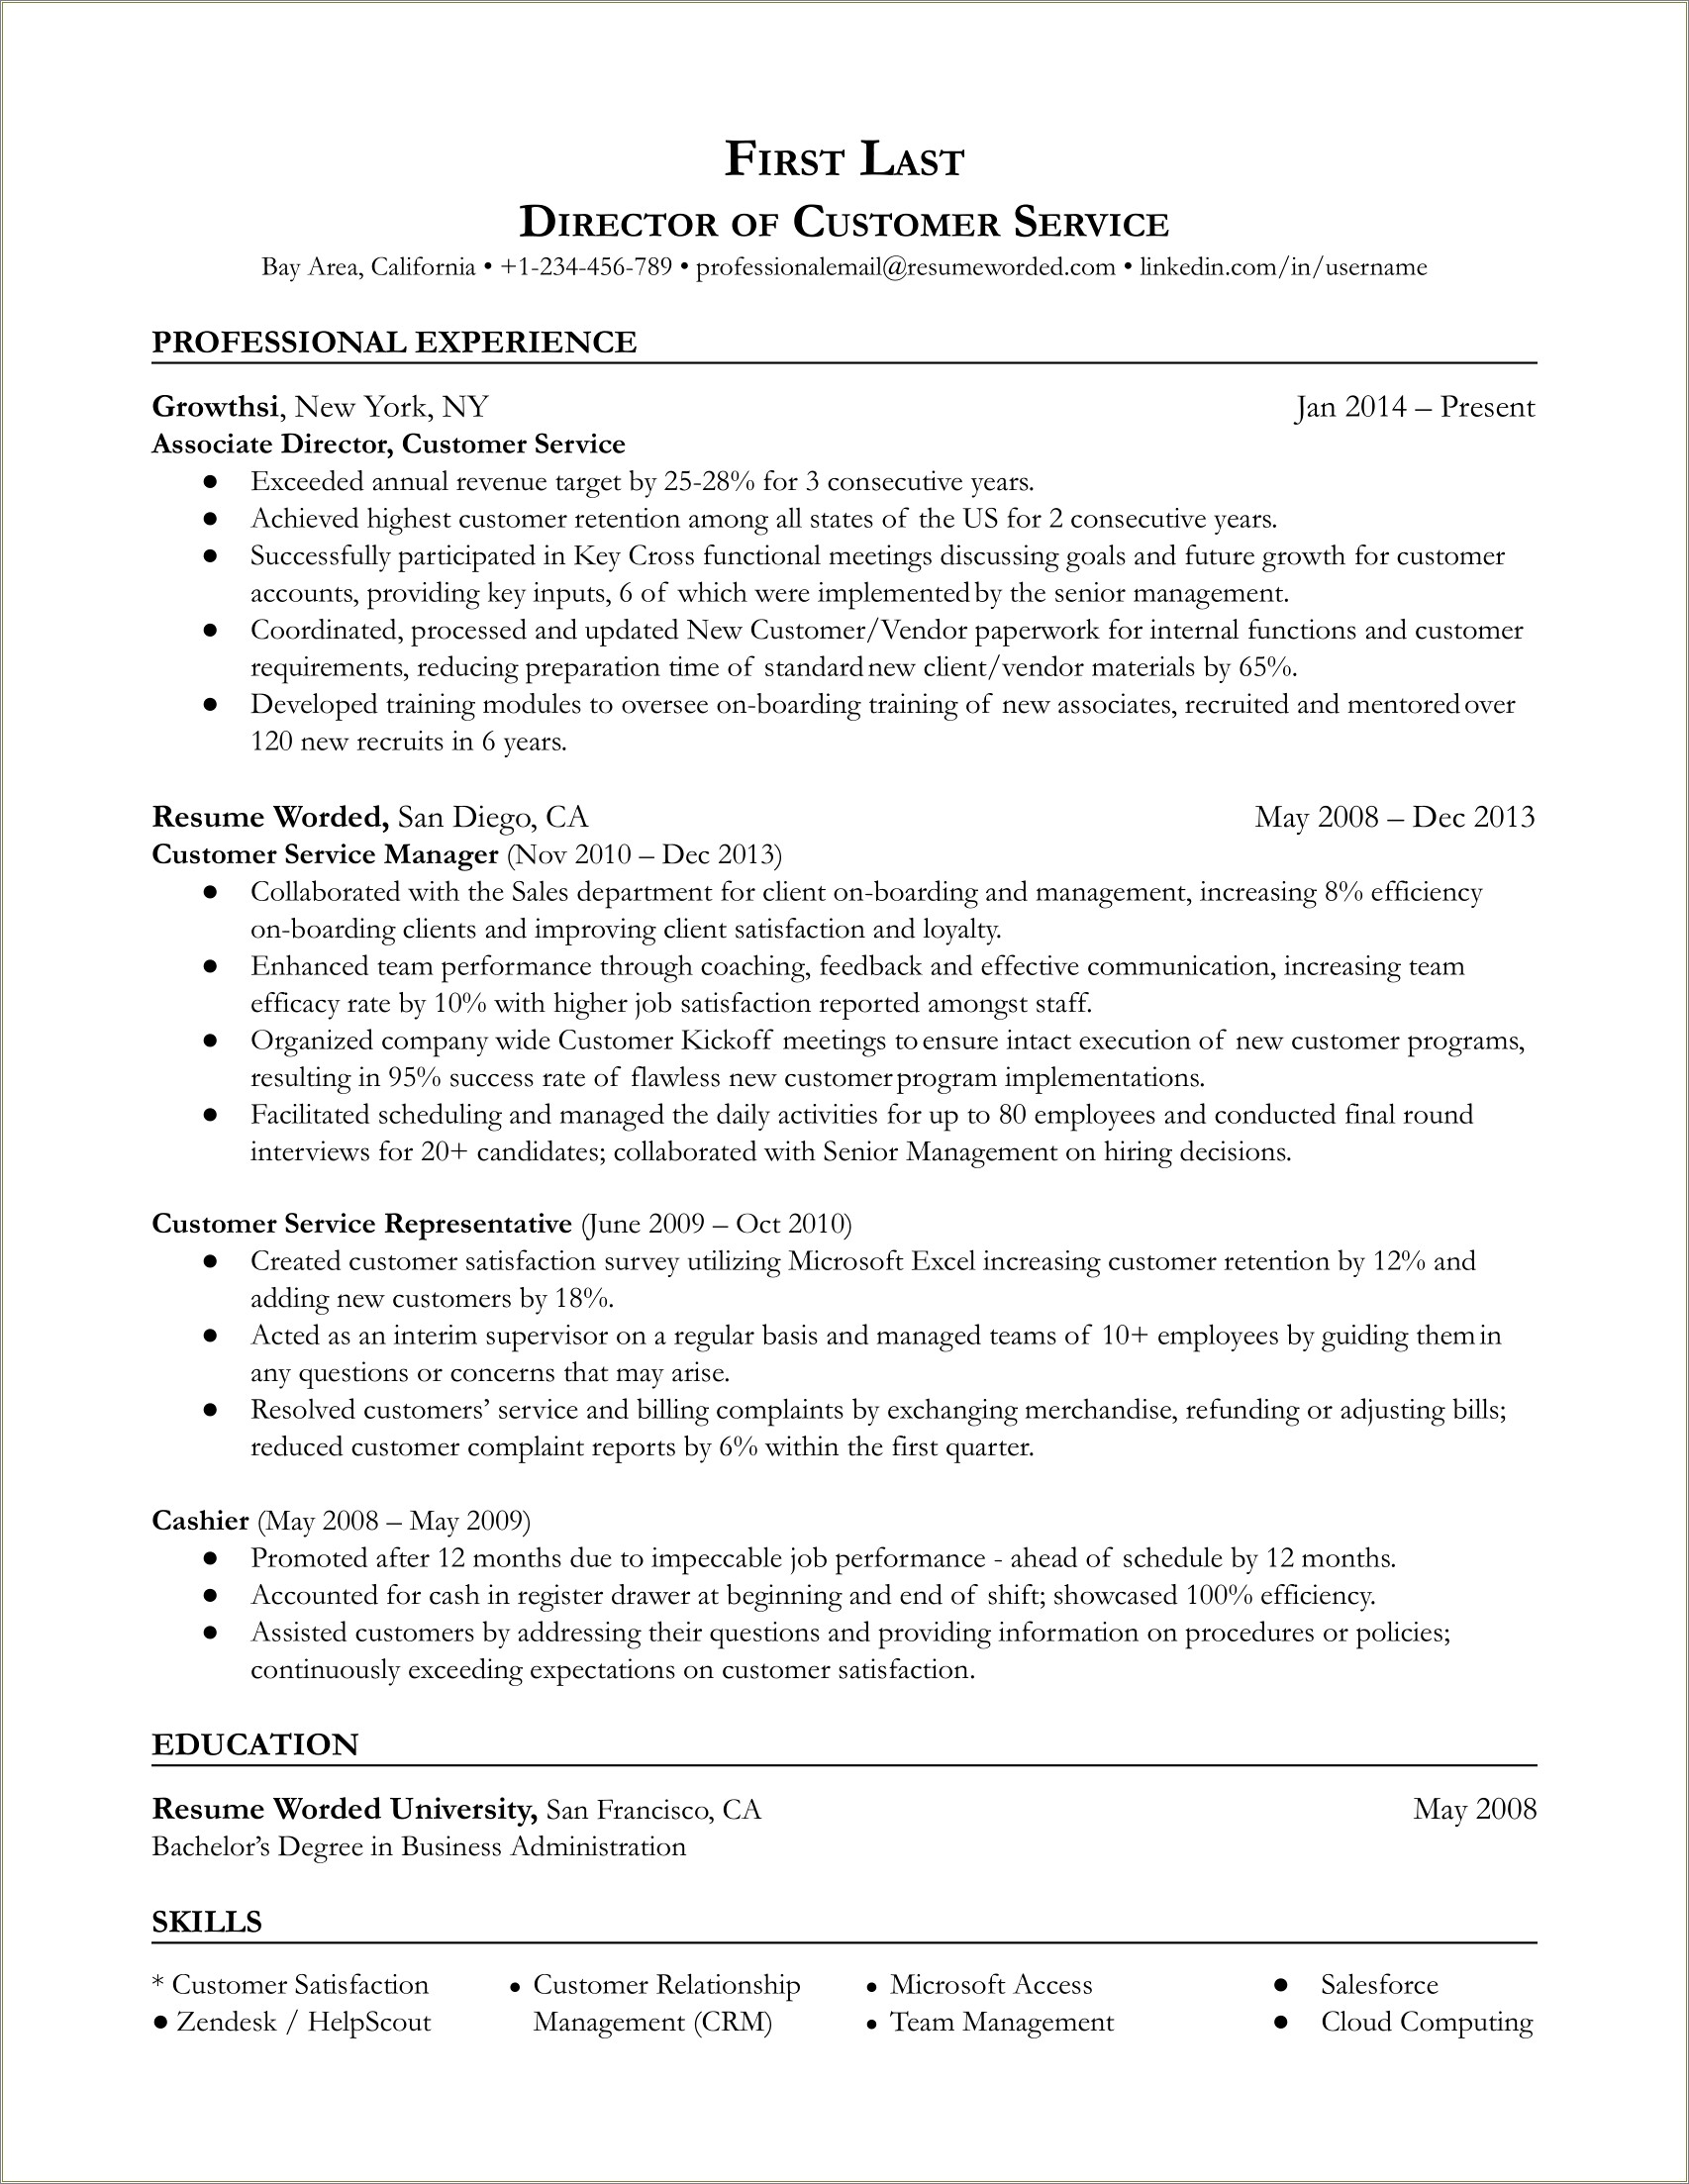 Resume Summary Examples For Entry Level Customer Service